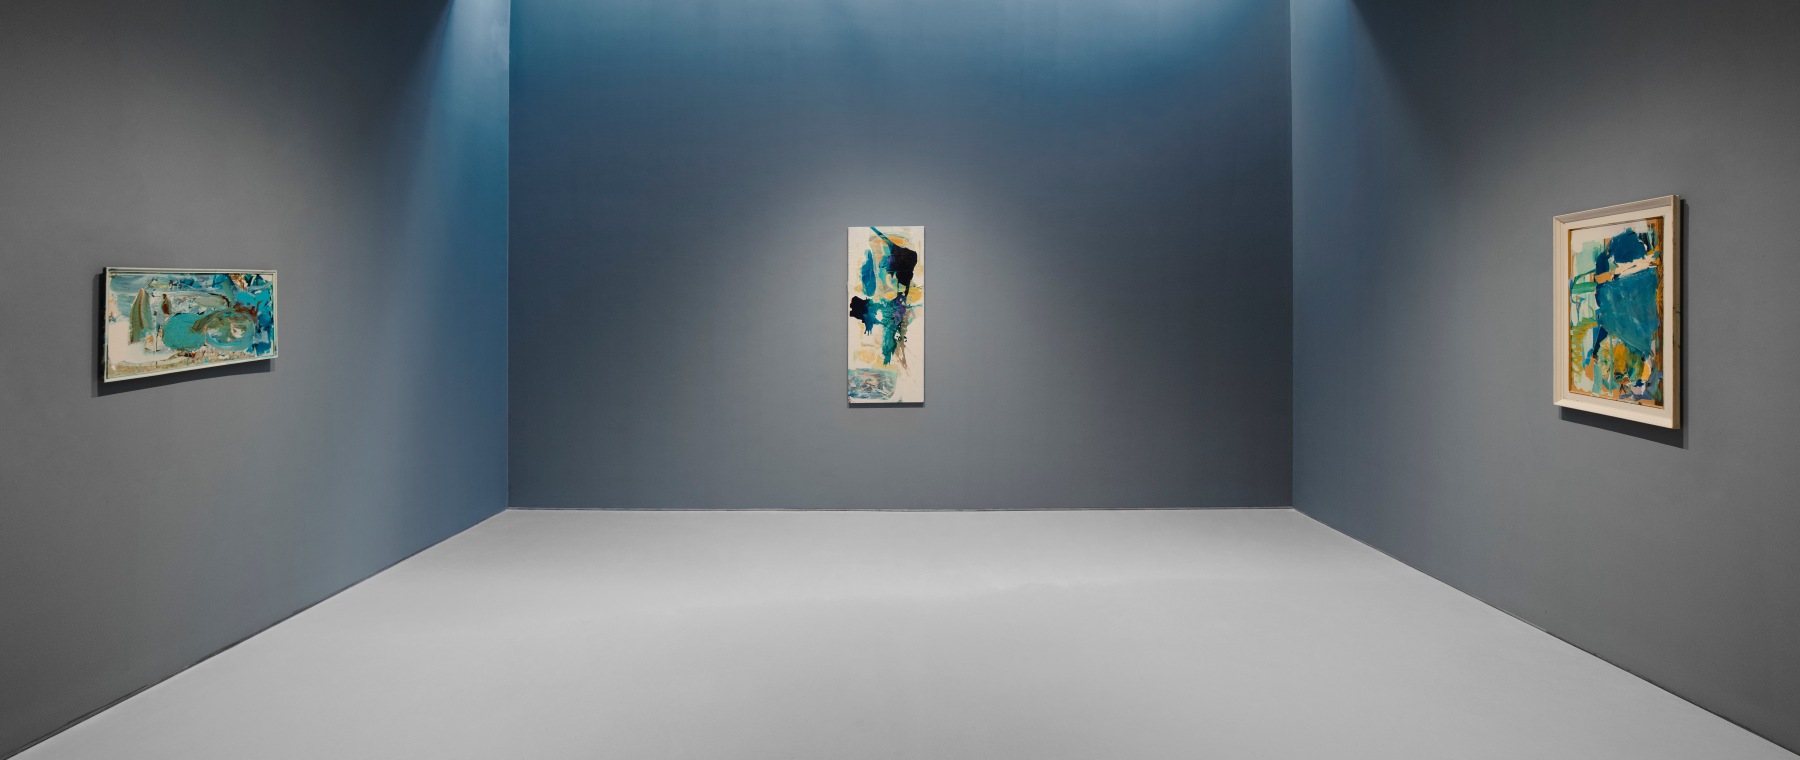 Three abstract paintings placed on separate adjacent blue walls